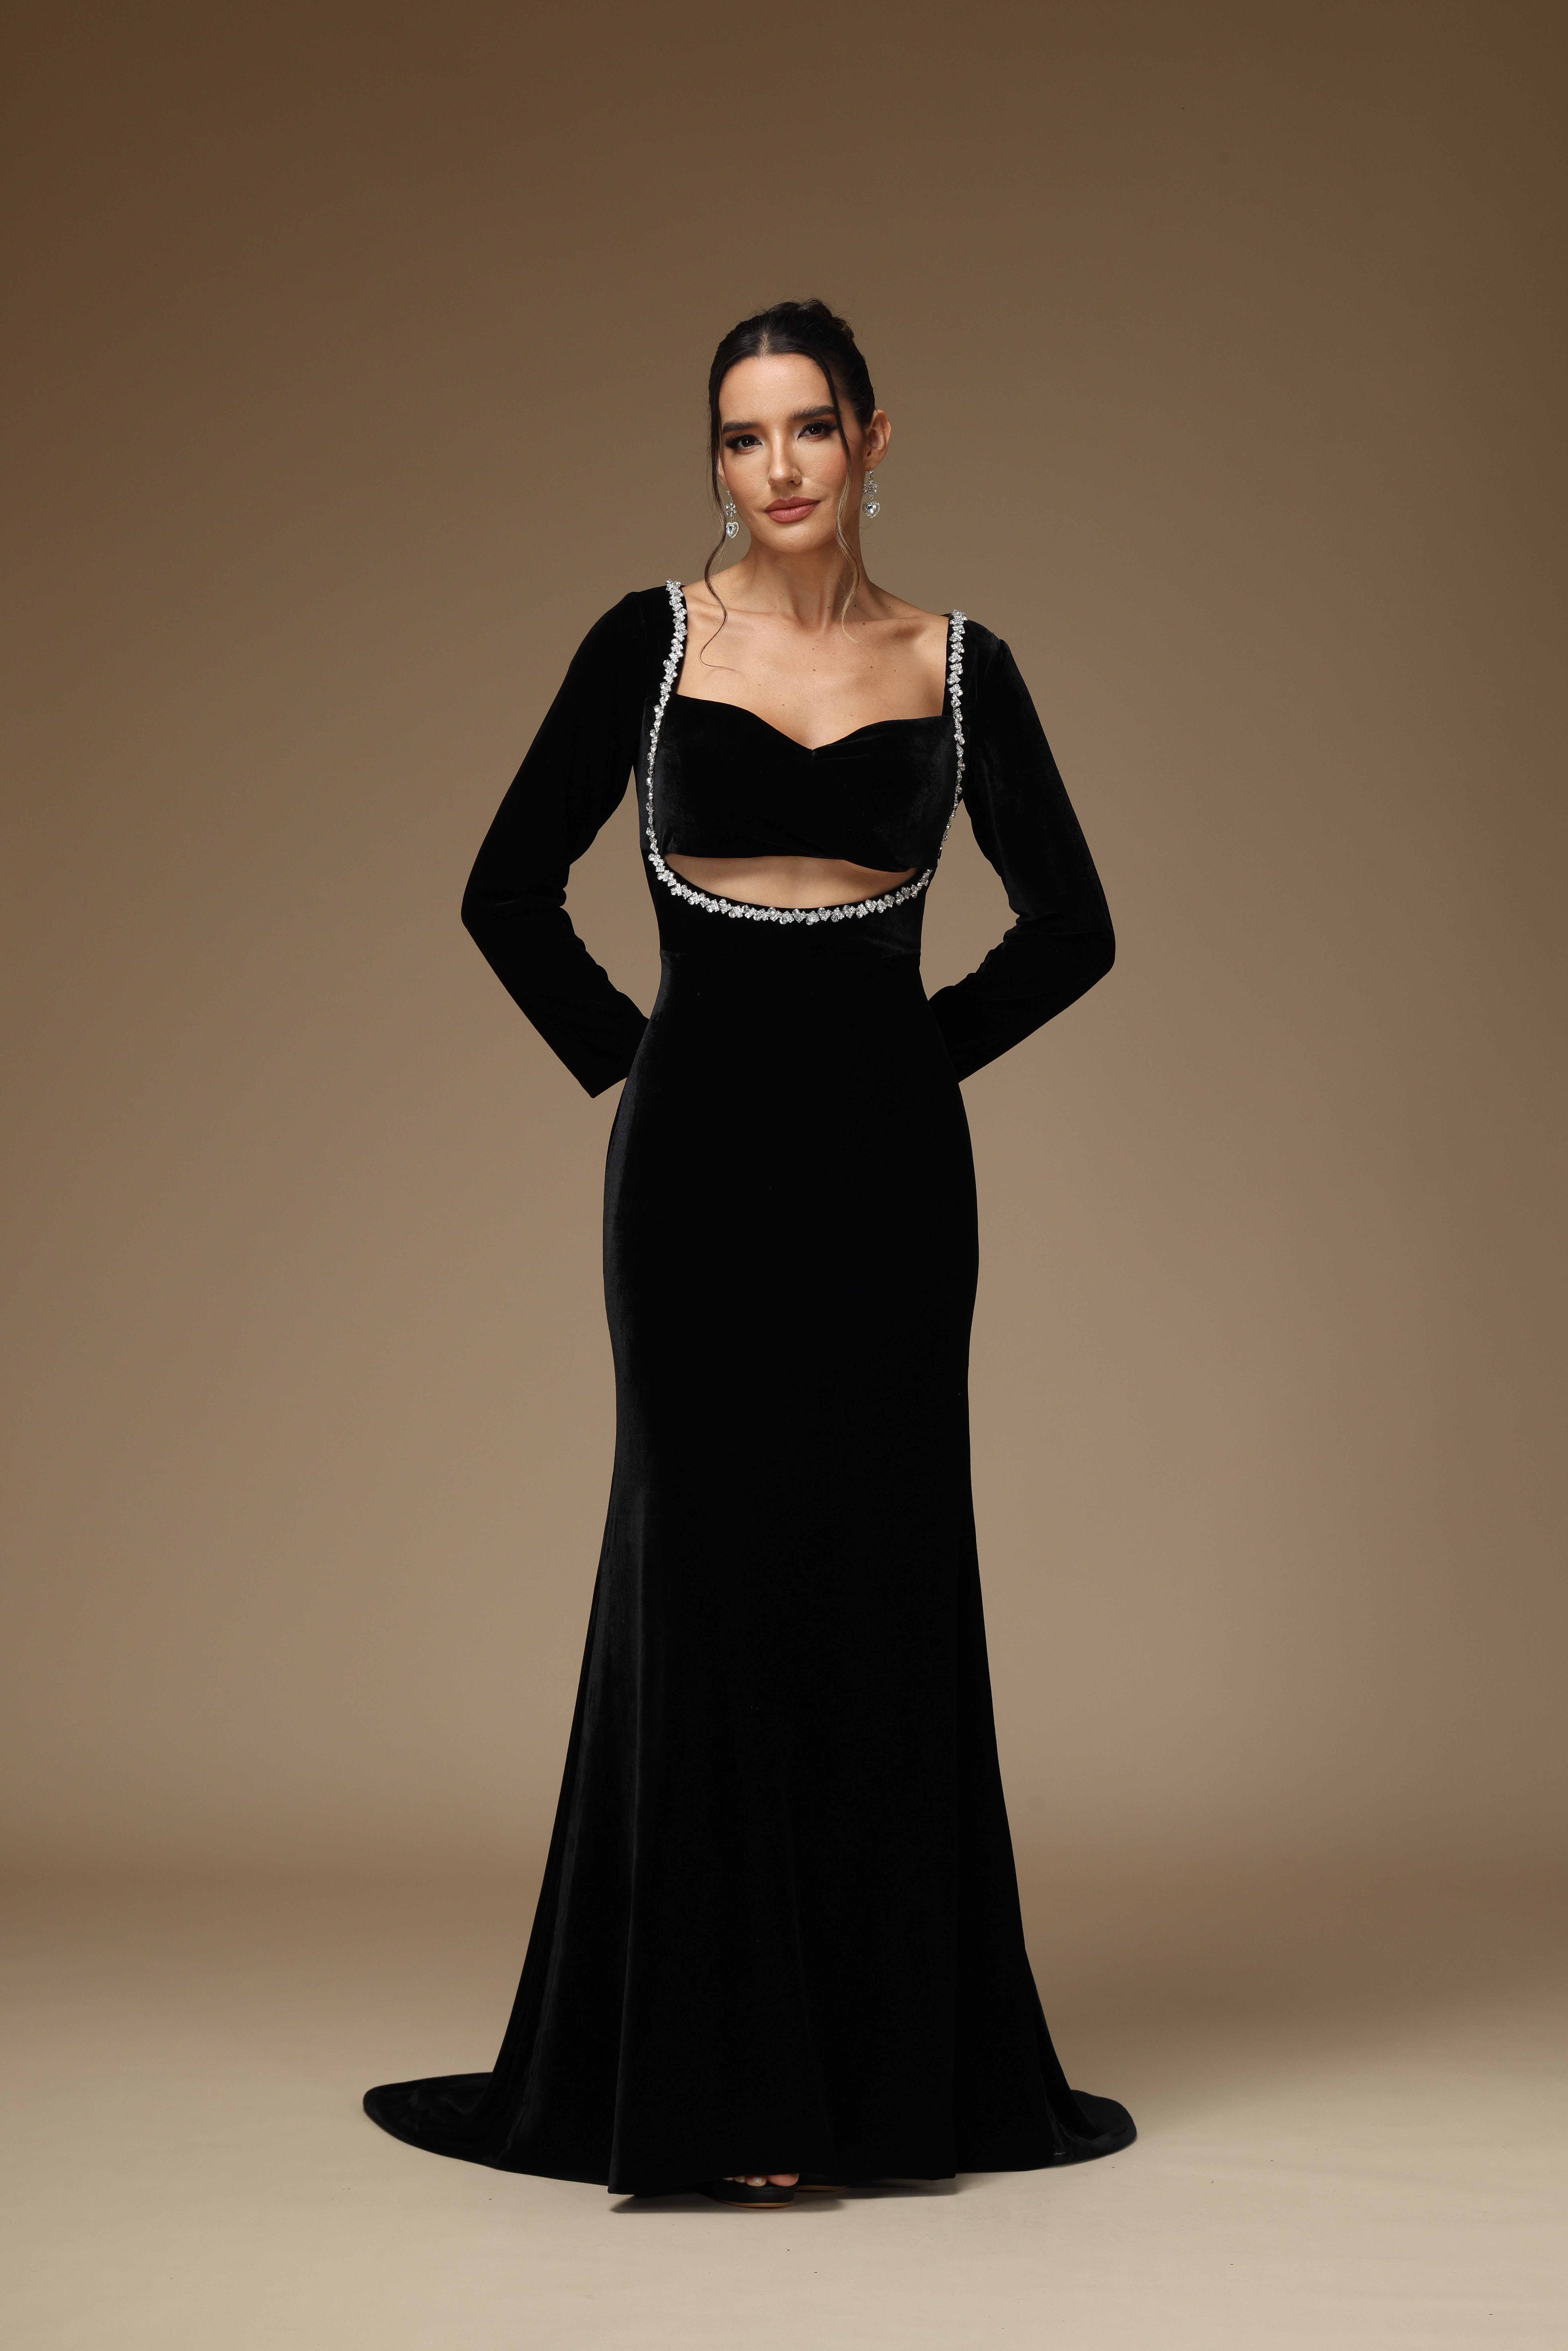 Ovlias Black Prom Dress Long Sleeves Black With Cut Out Gown YX0012